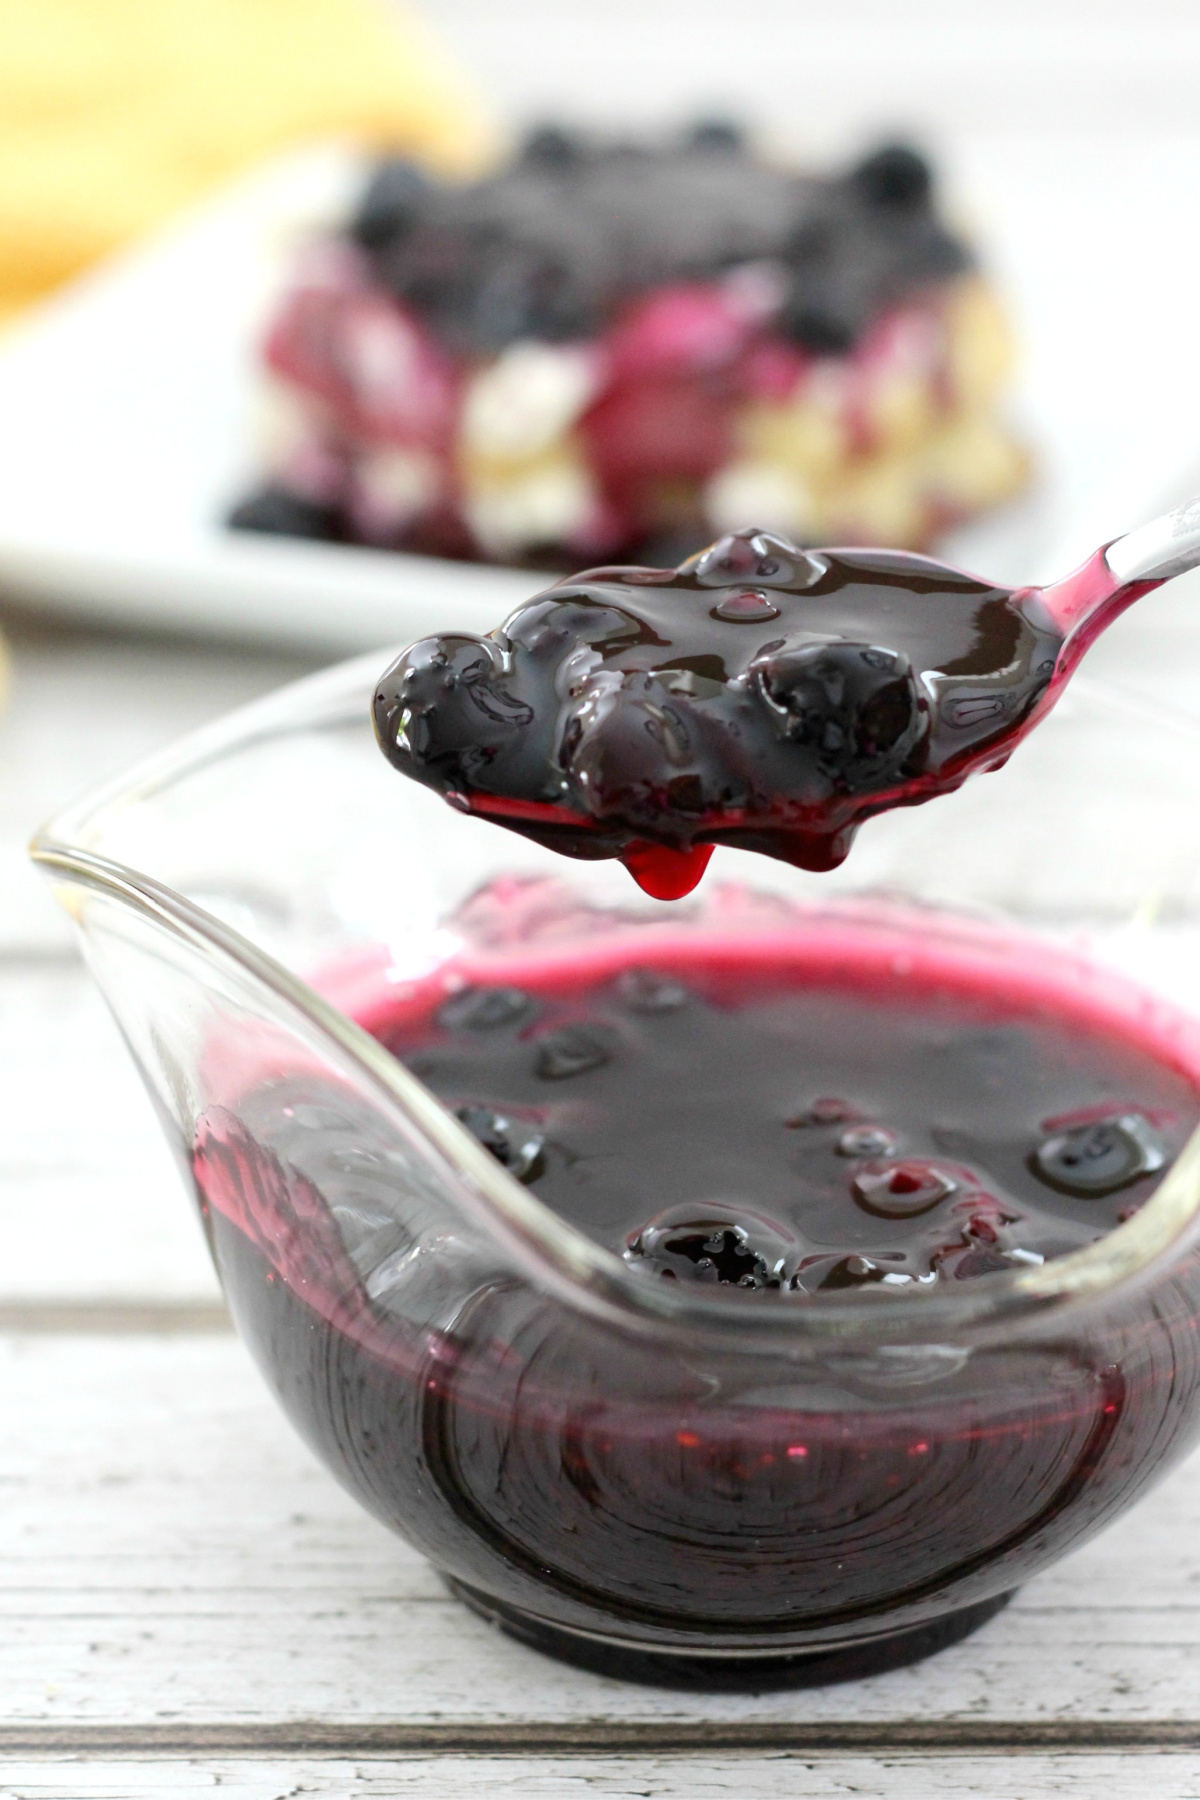 A spoon is being dipped into a bowl of blueberry sauce.